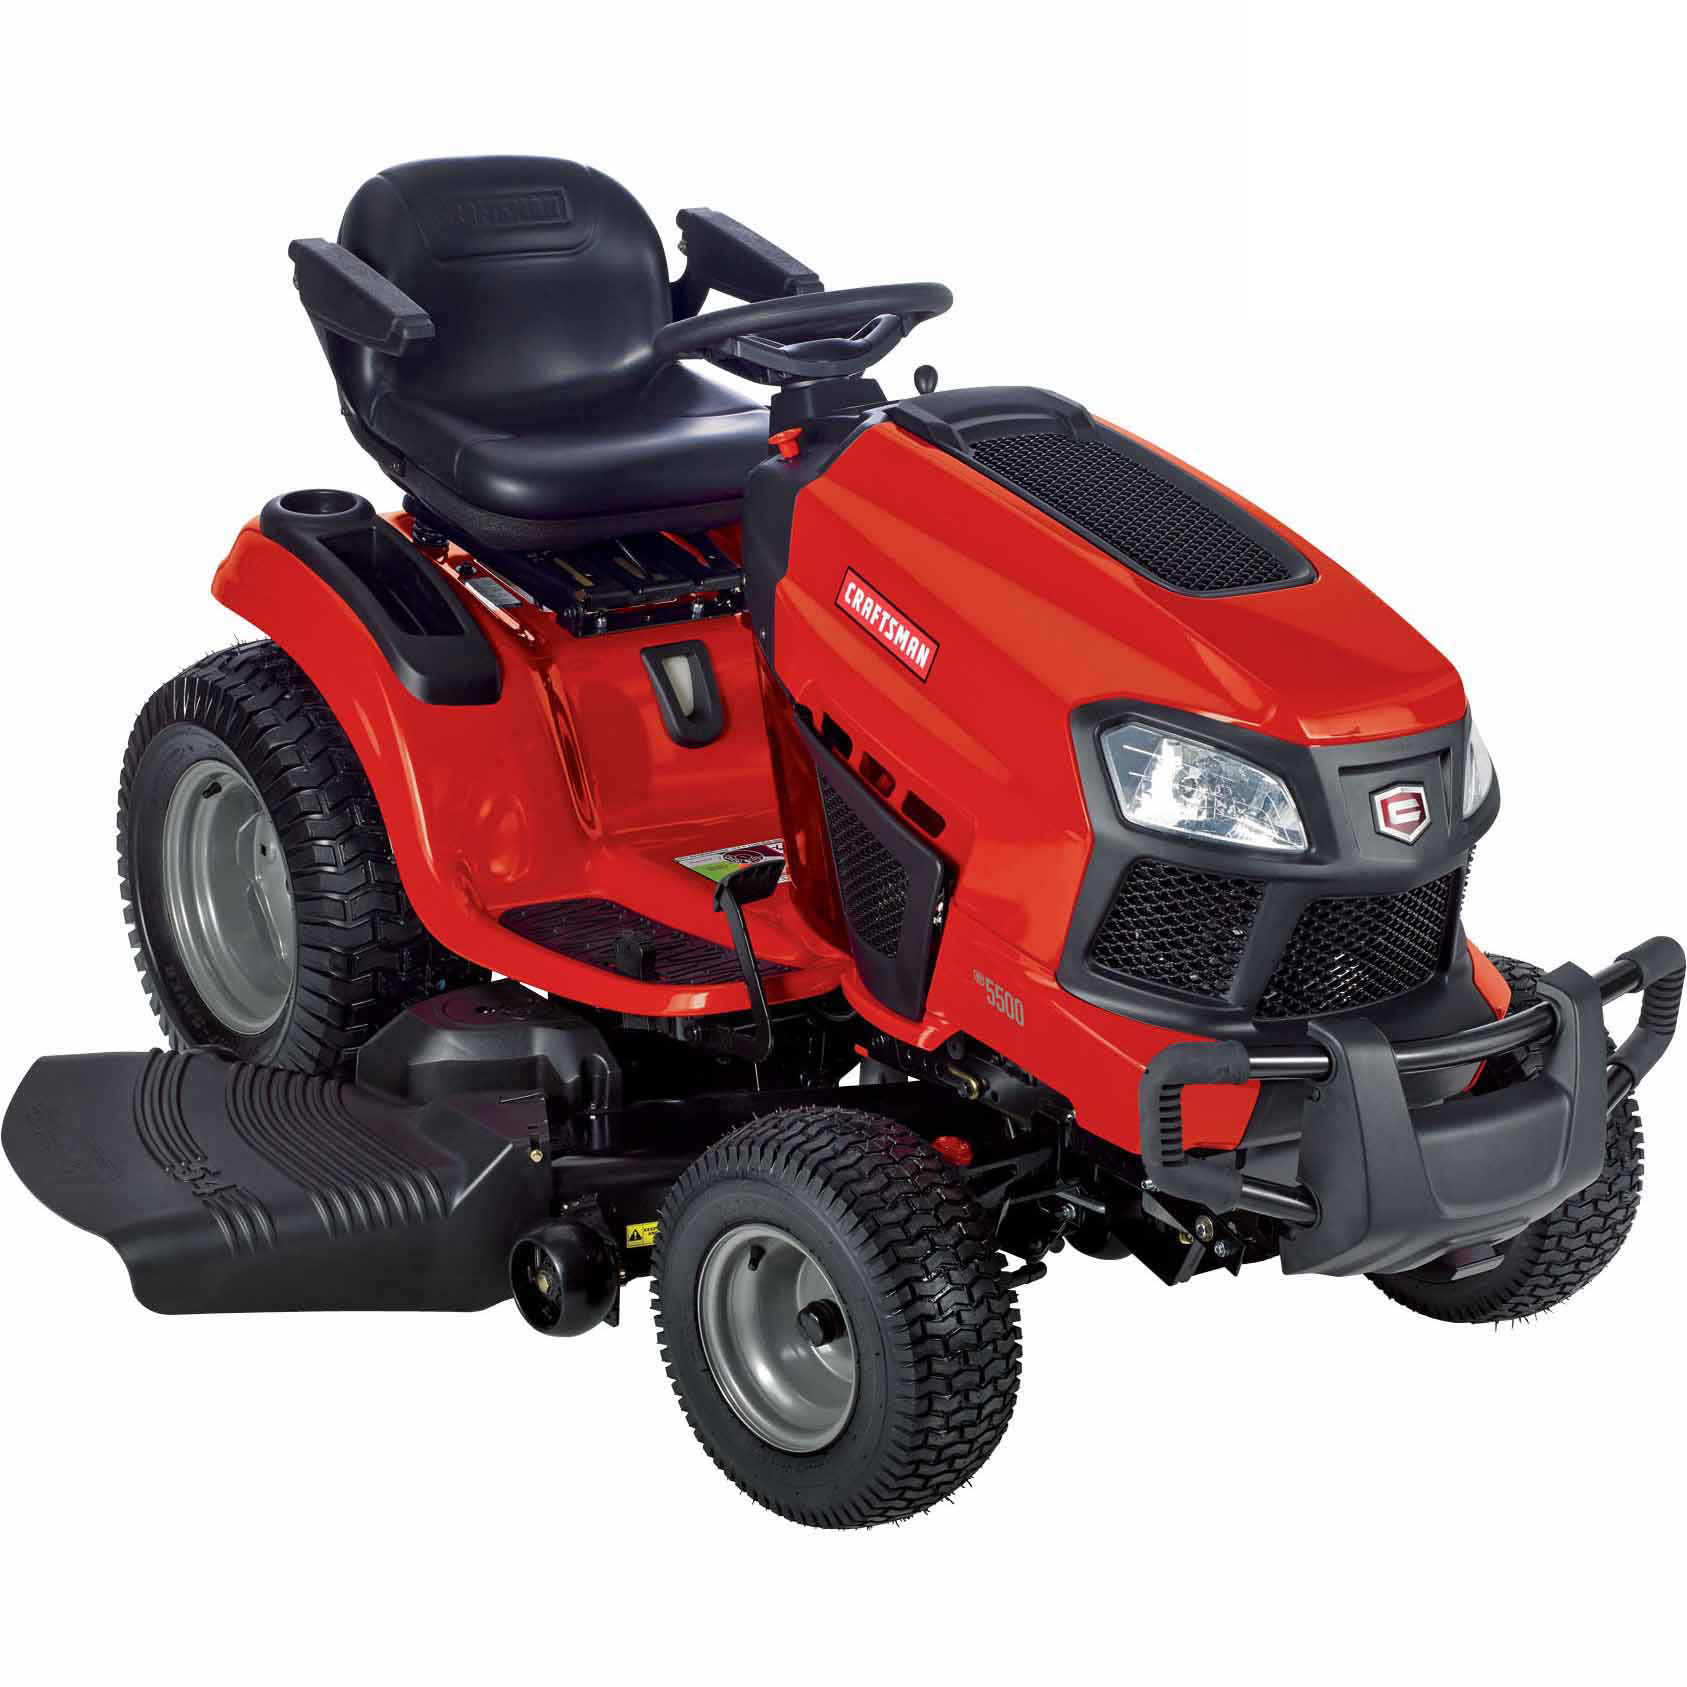 Craftsman 24HP 54" Complete Start™ Garden Tractor: Nimble at Sears